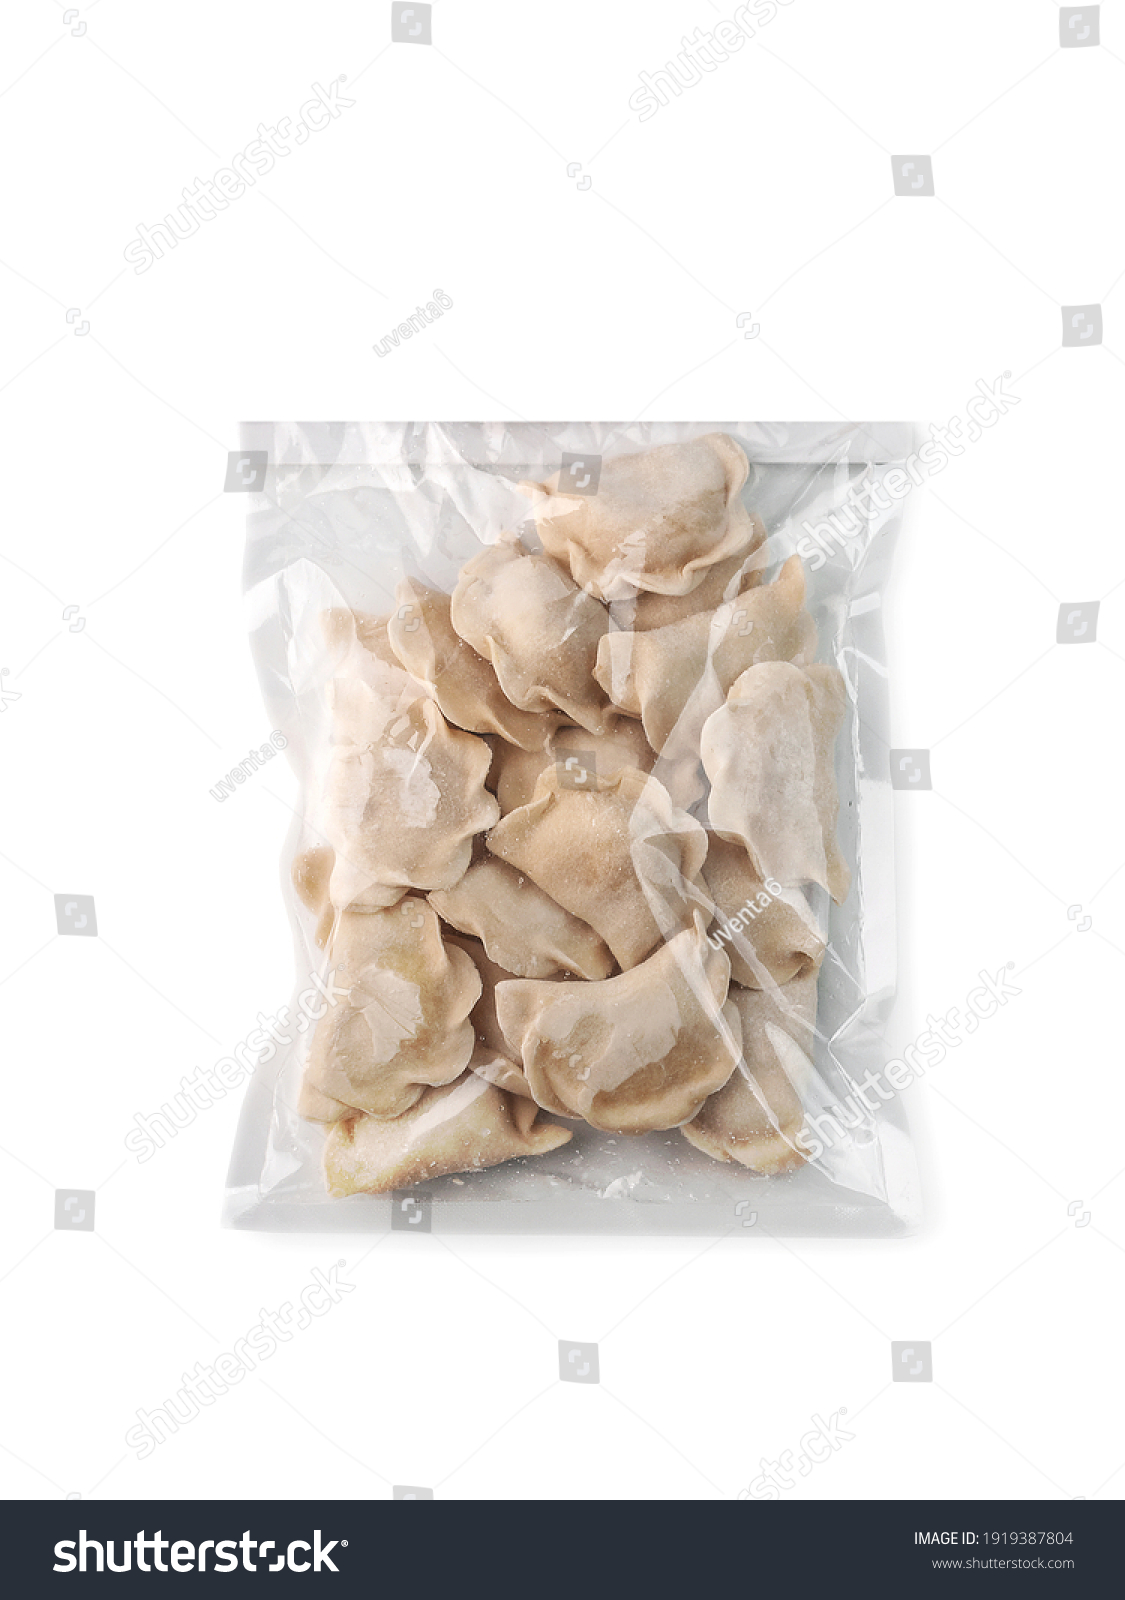 frozen uncooked dumplings in recycled plastic bag on white background isolated #1919387804